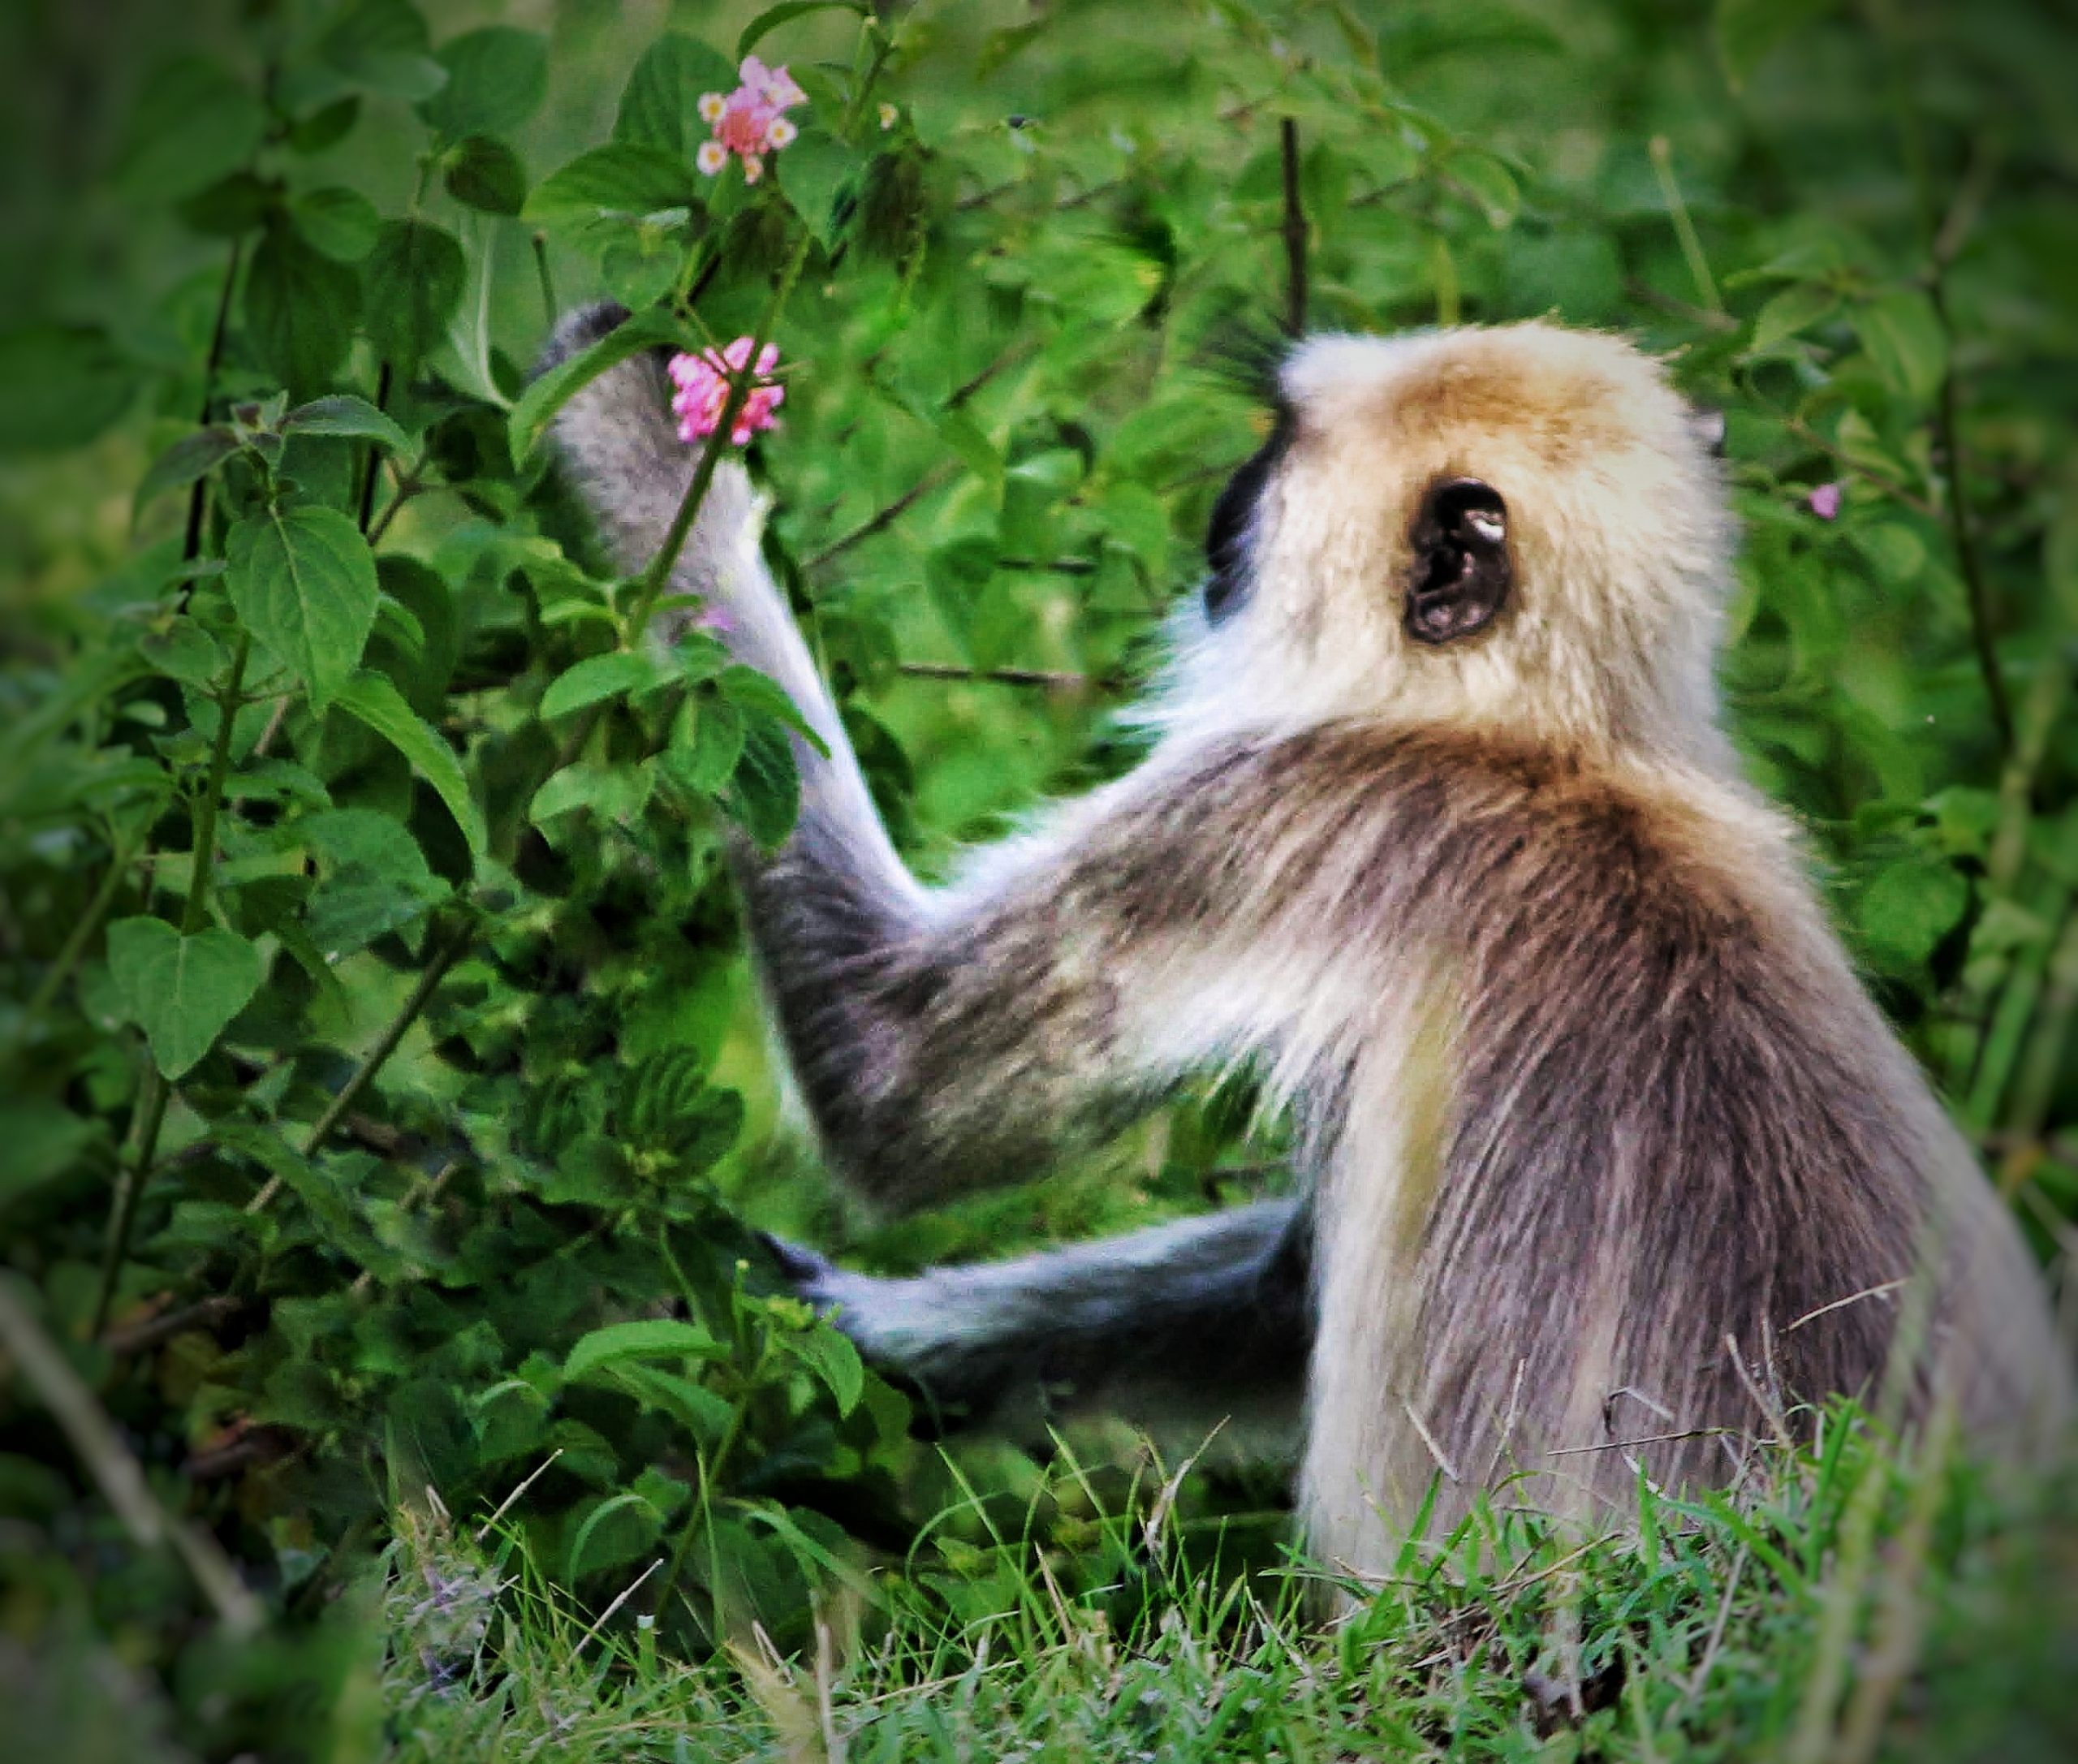 A monkey eating flower seeds